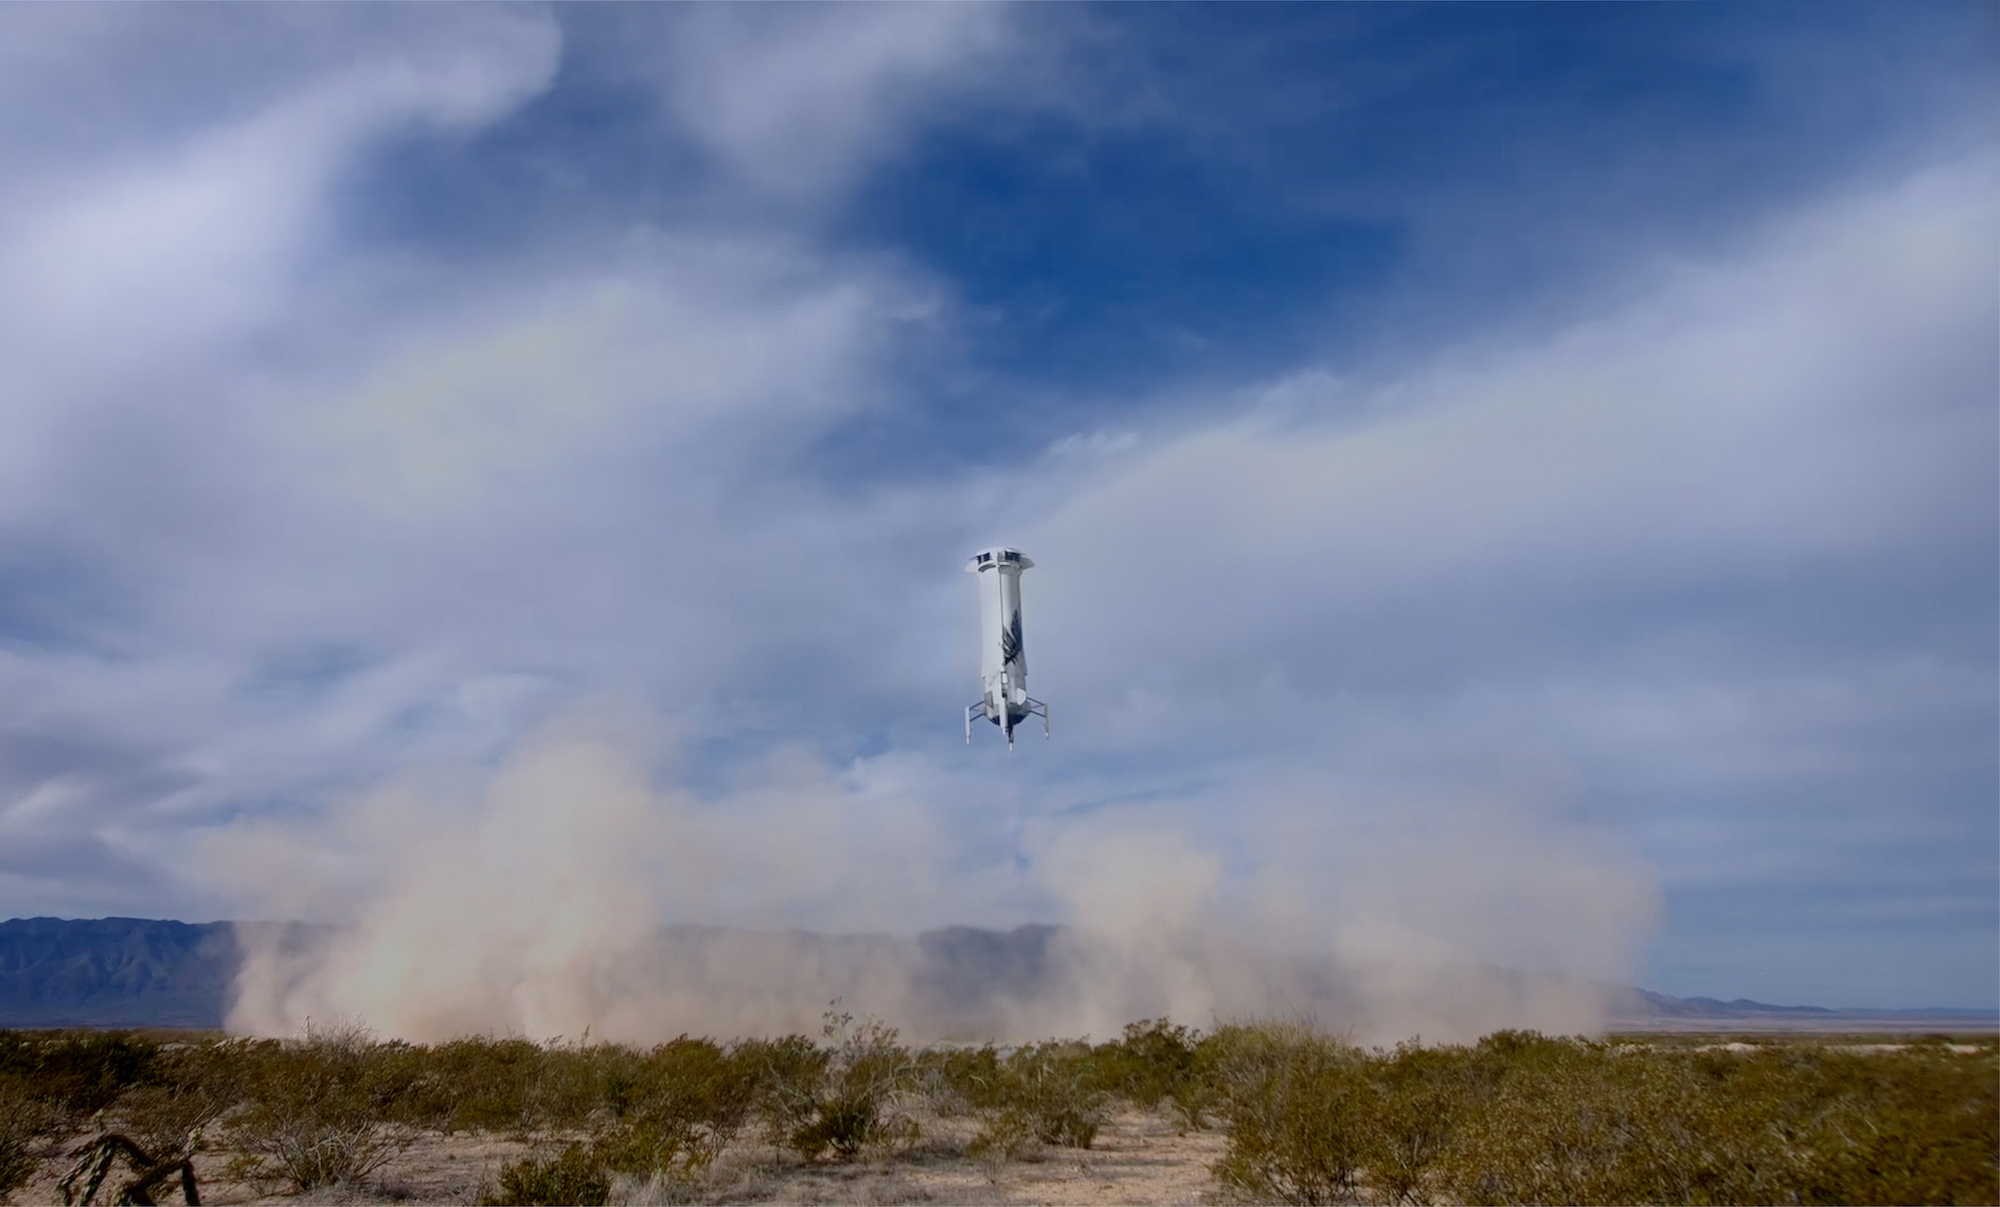 A perfect flight: Blue Origin successfully launches and lands New Shepard rocket